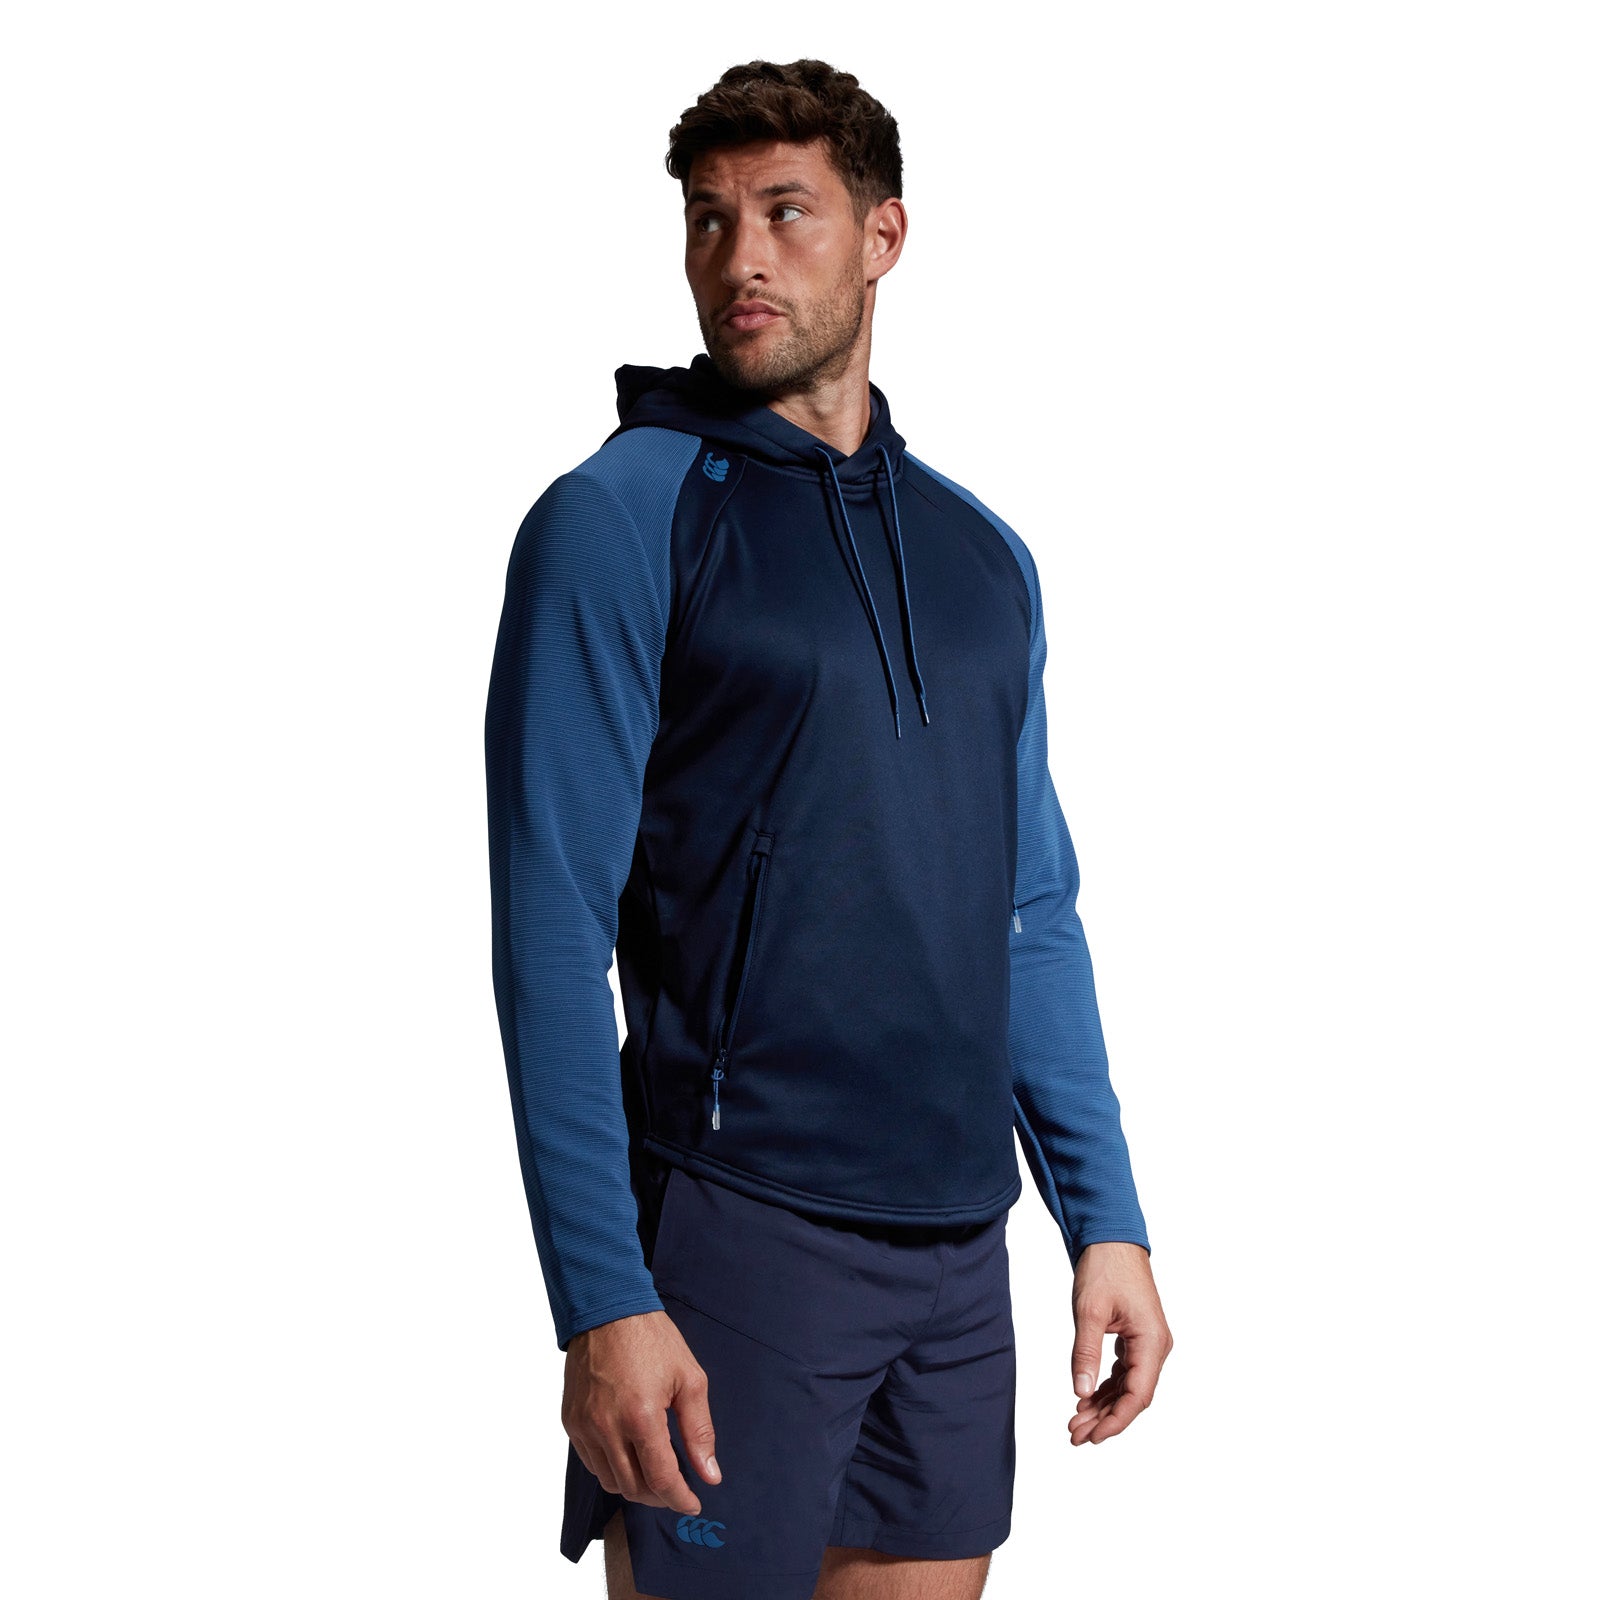 Photo of model wearing the Canterbury Elite Training Hoody Navy, side view